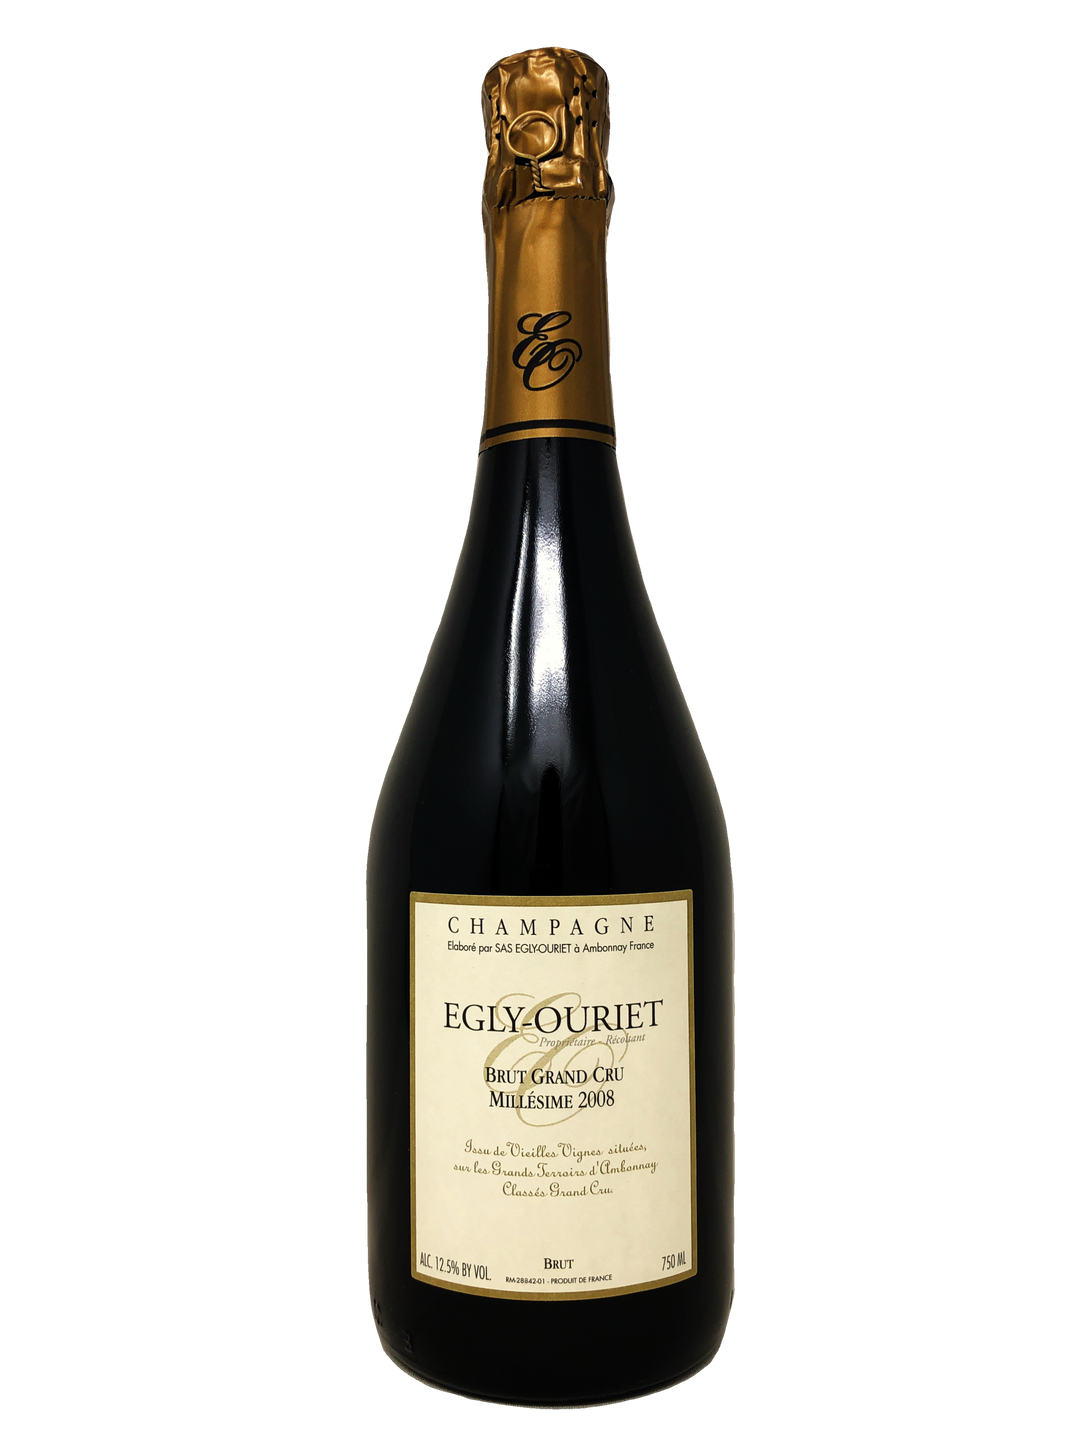 Champagne Egly-Ouriet Grand Cru Extra Brut 2008